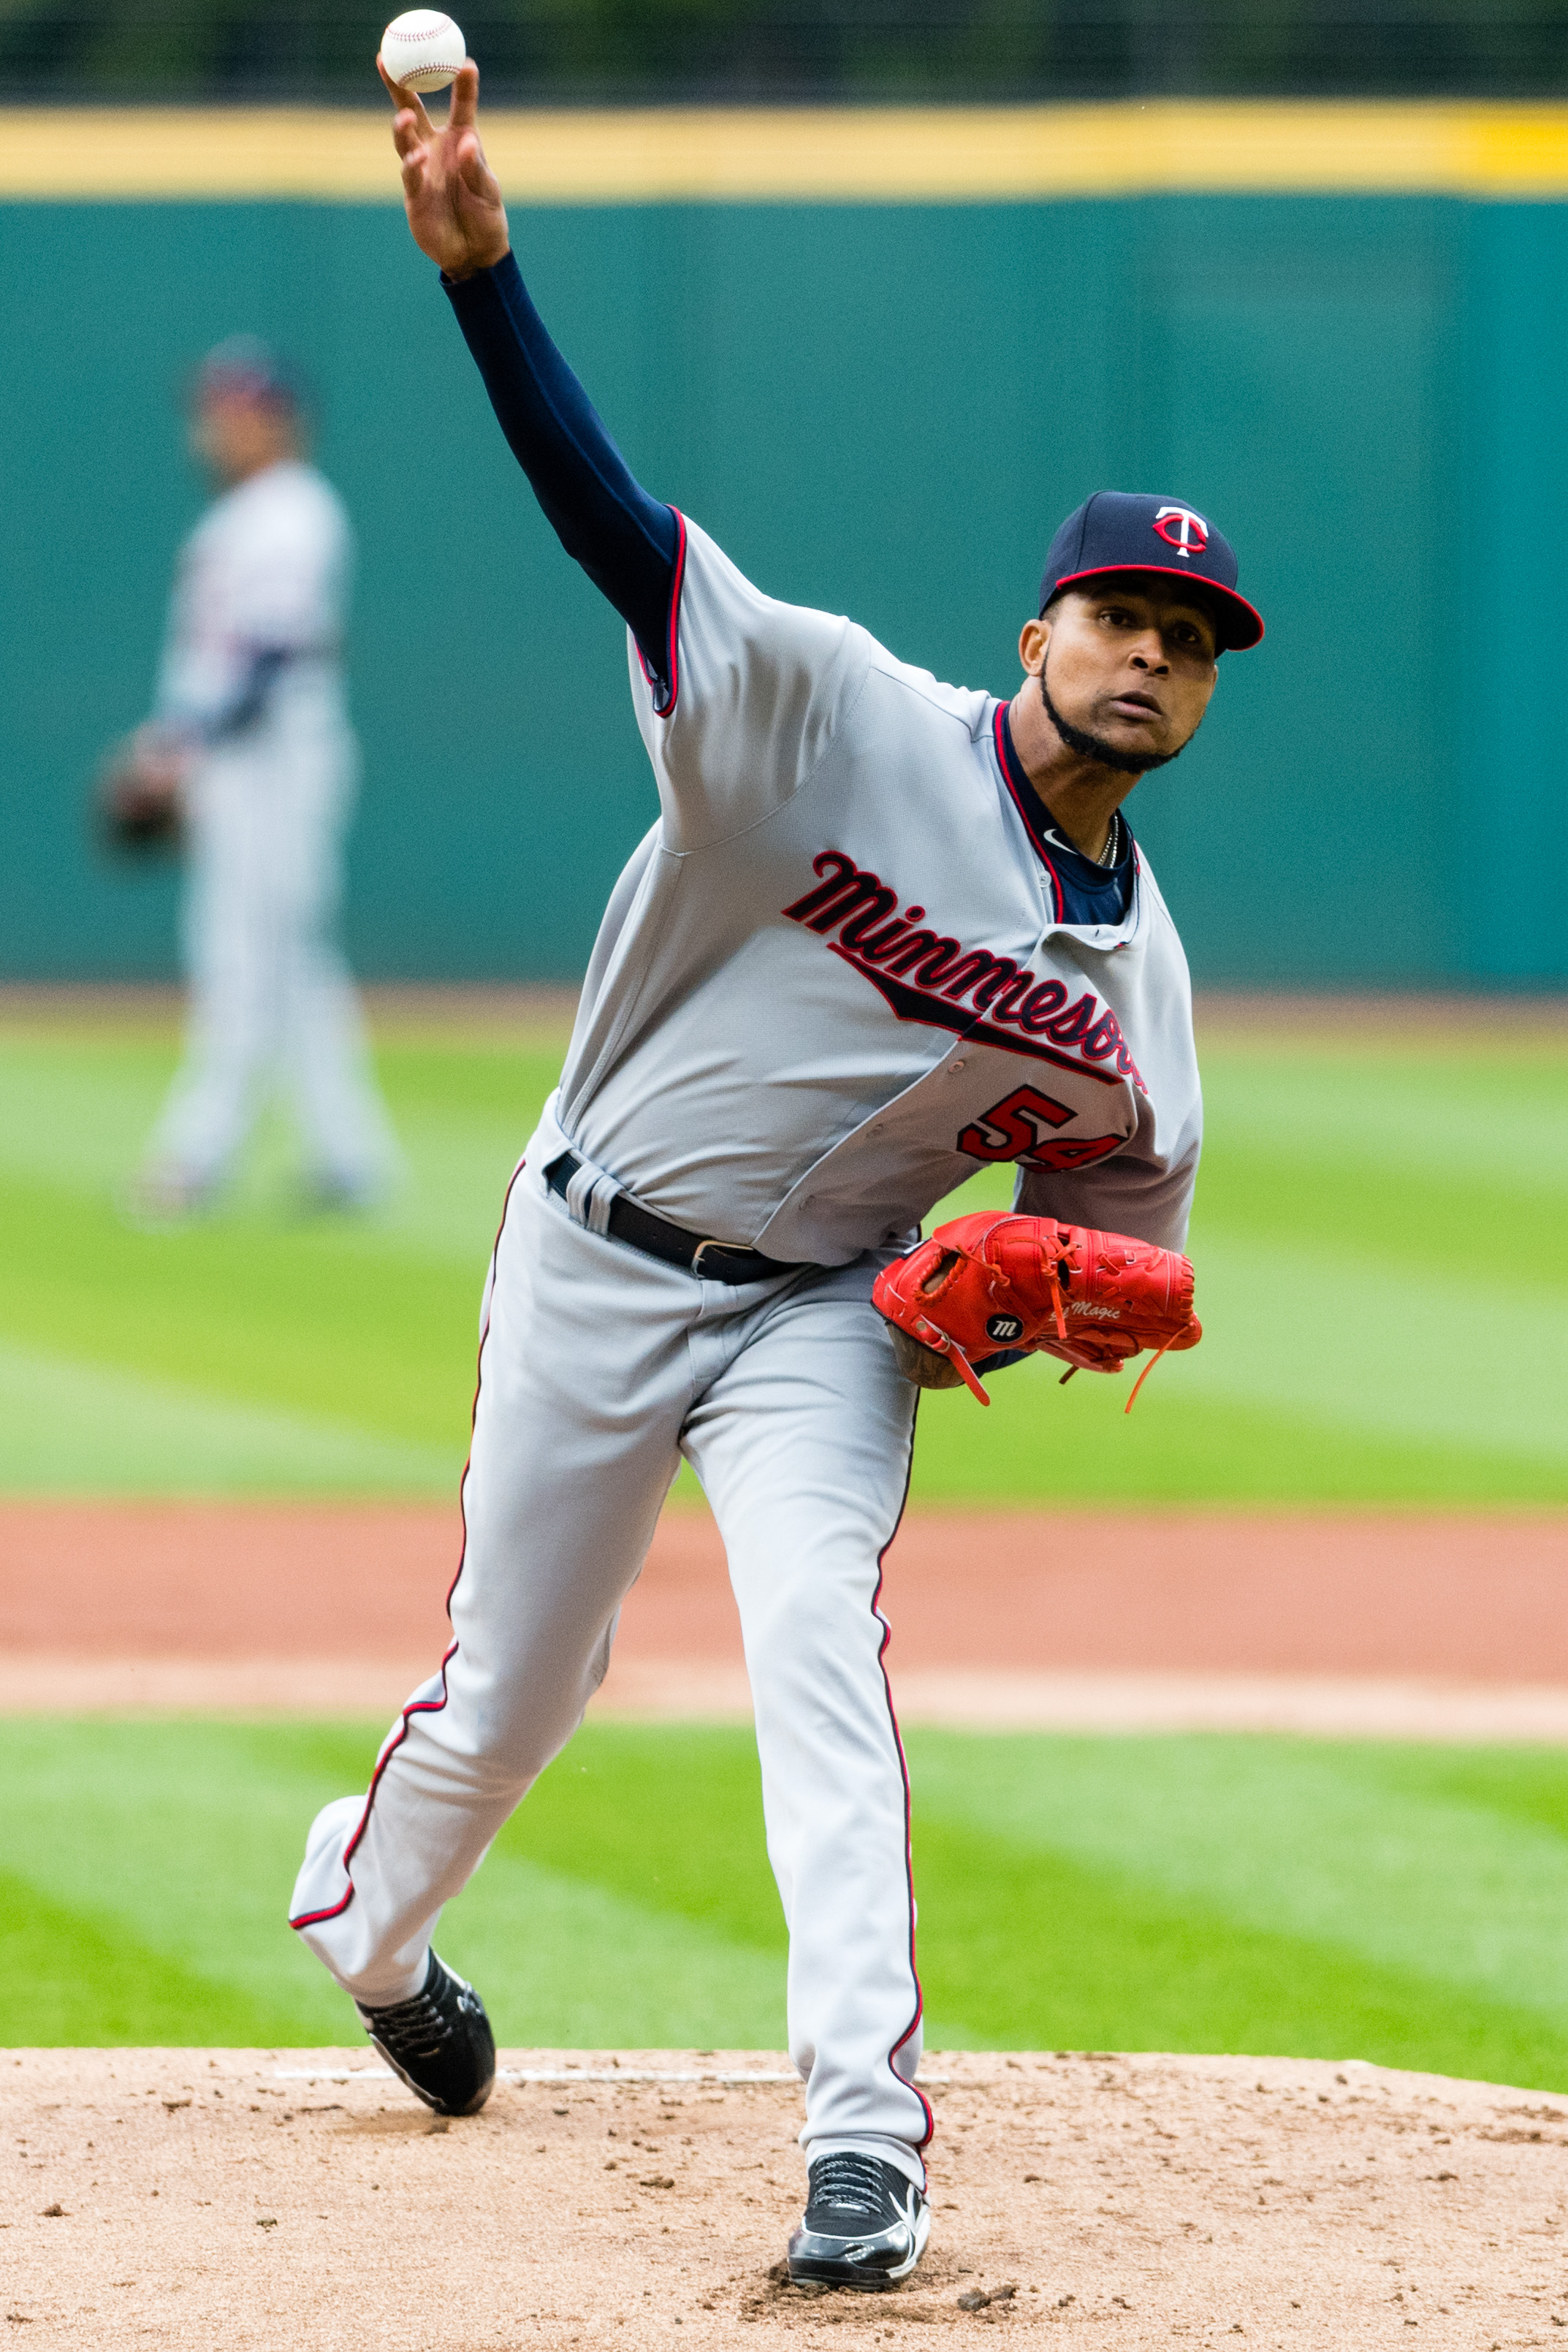 Twins 1, Indians 0 - This game is already over